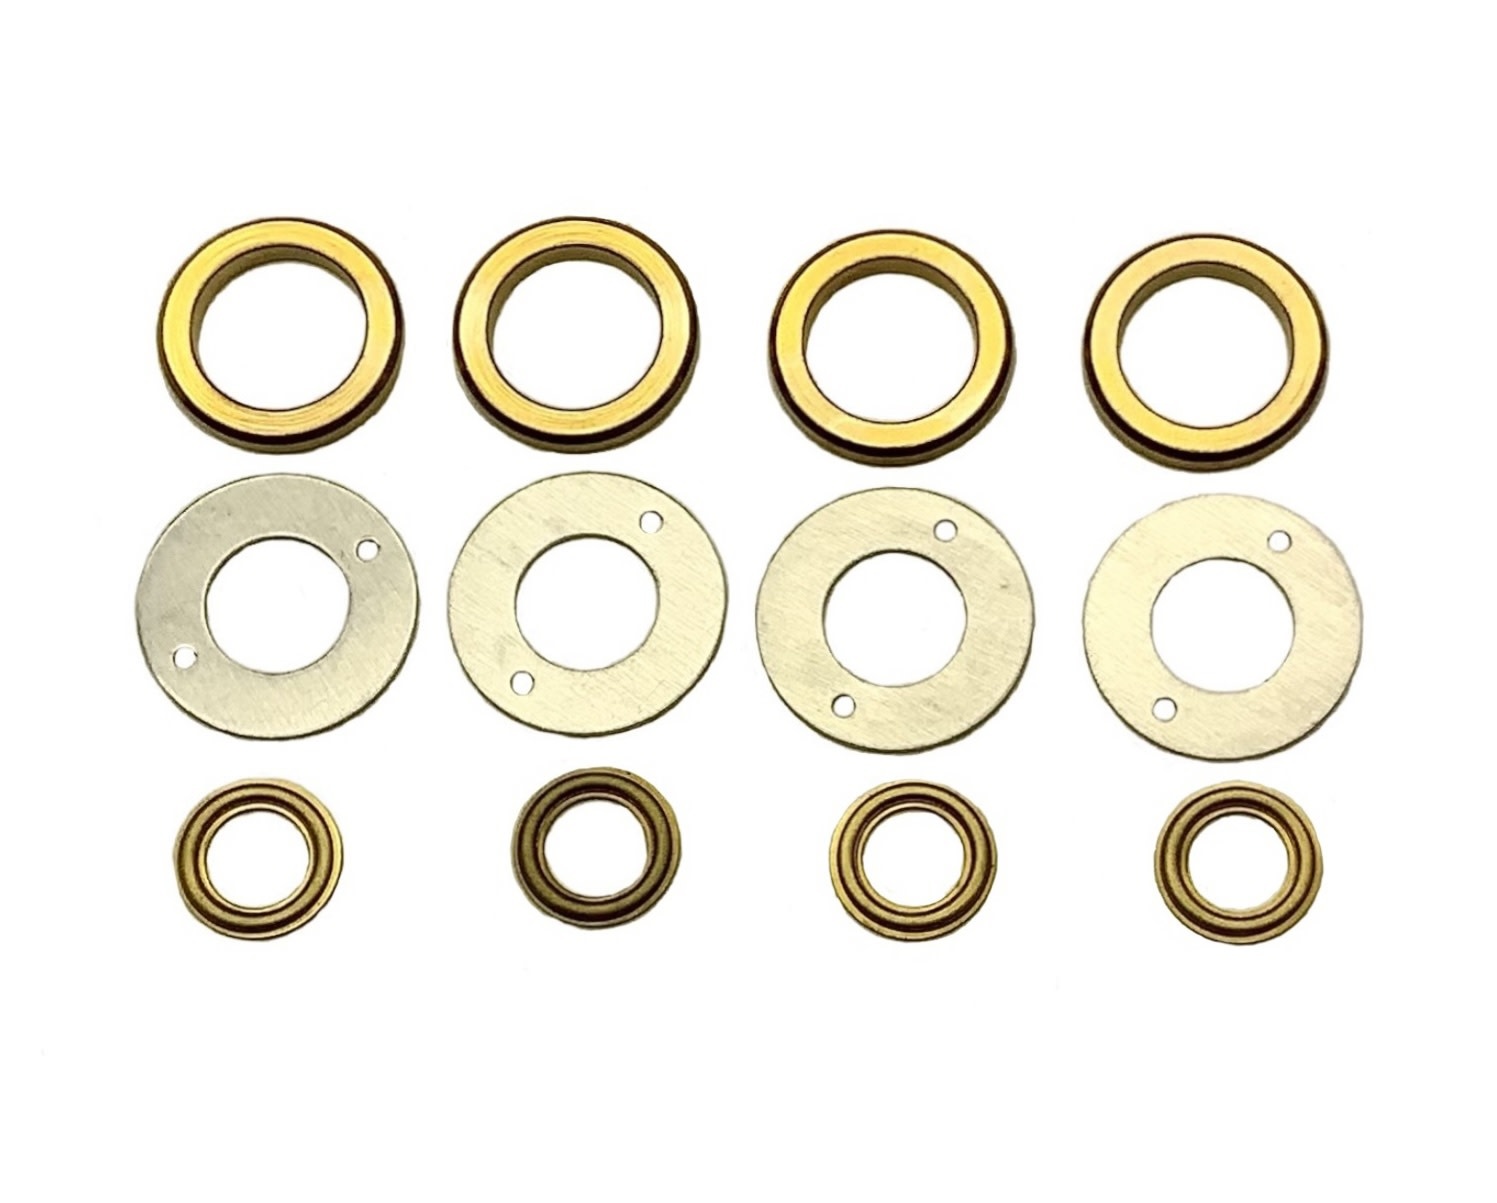 L & 2L (early), and B, 2B, 3B - Injector Washer/Seal Kit (for 4 injectors) - IWKTO500